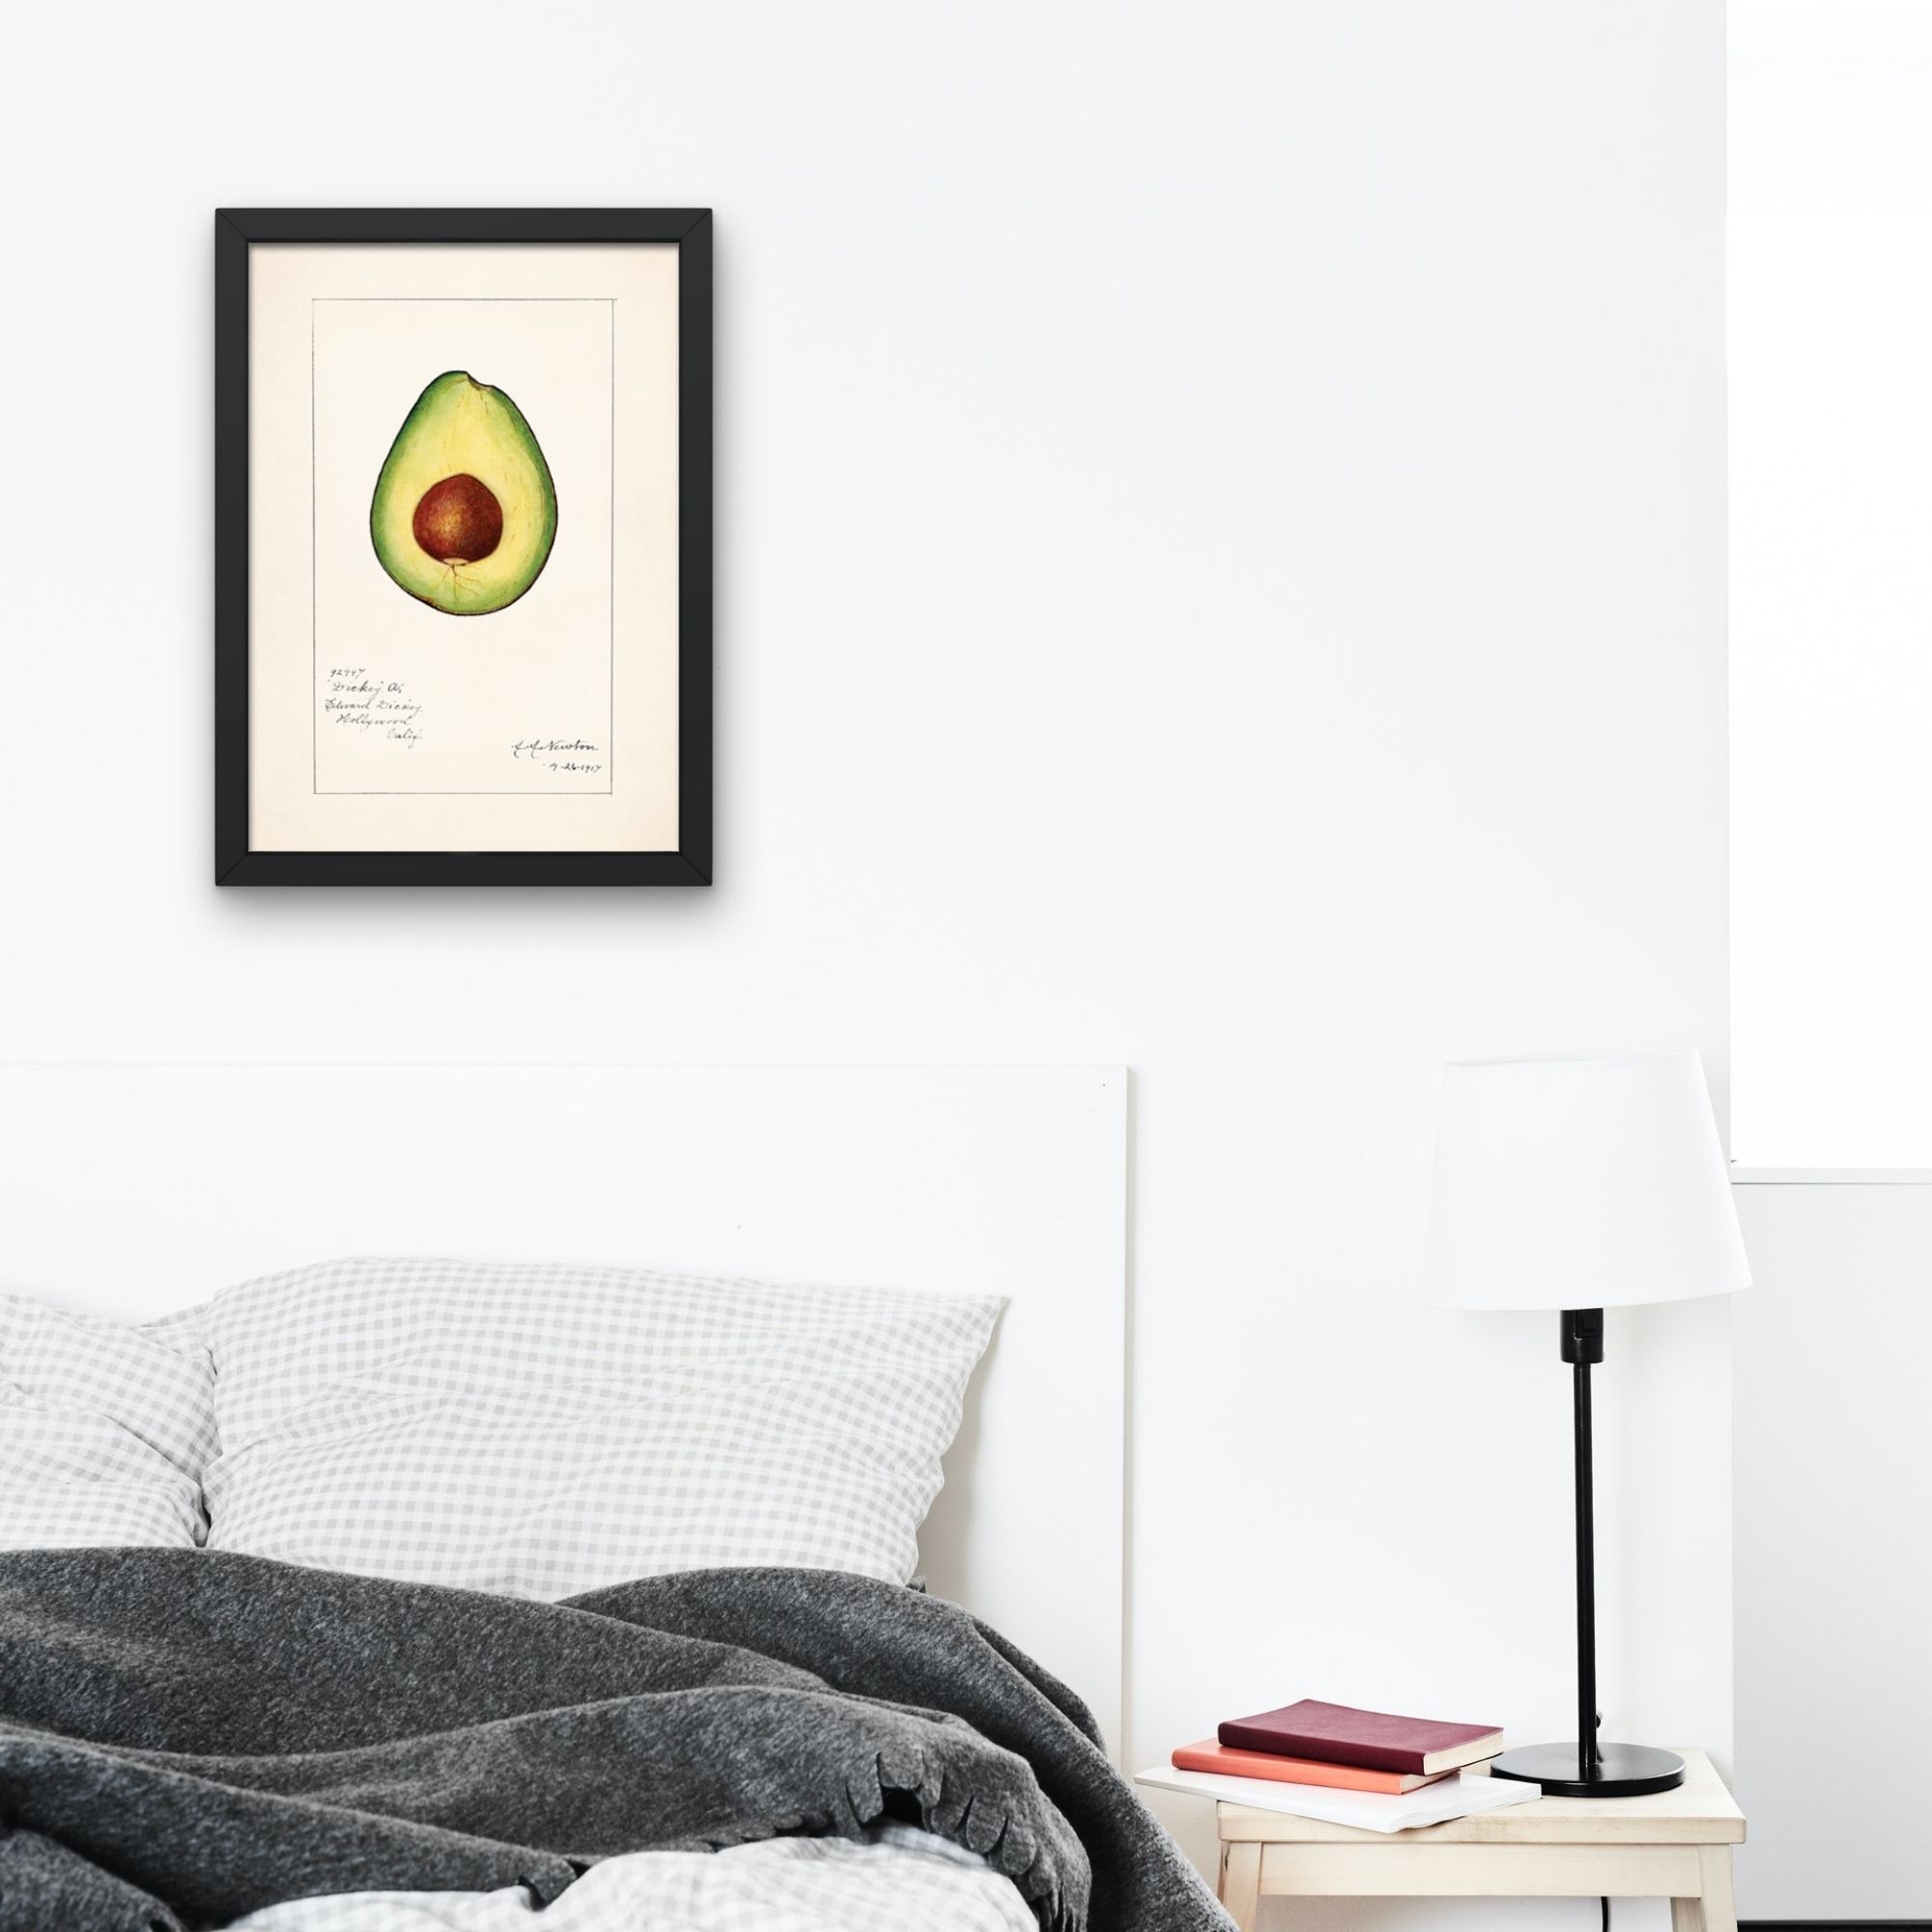 Vibrant botanical watercolor painting of a halved avocado with a prominent pit, from The Pomological Watercolor Collection, featuring the 'Dickey Avocado' variety from Hollywood, California, expertly illustrated by artist A.H. Newton, dated 7-26-1917.